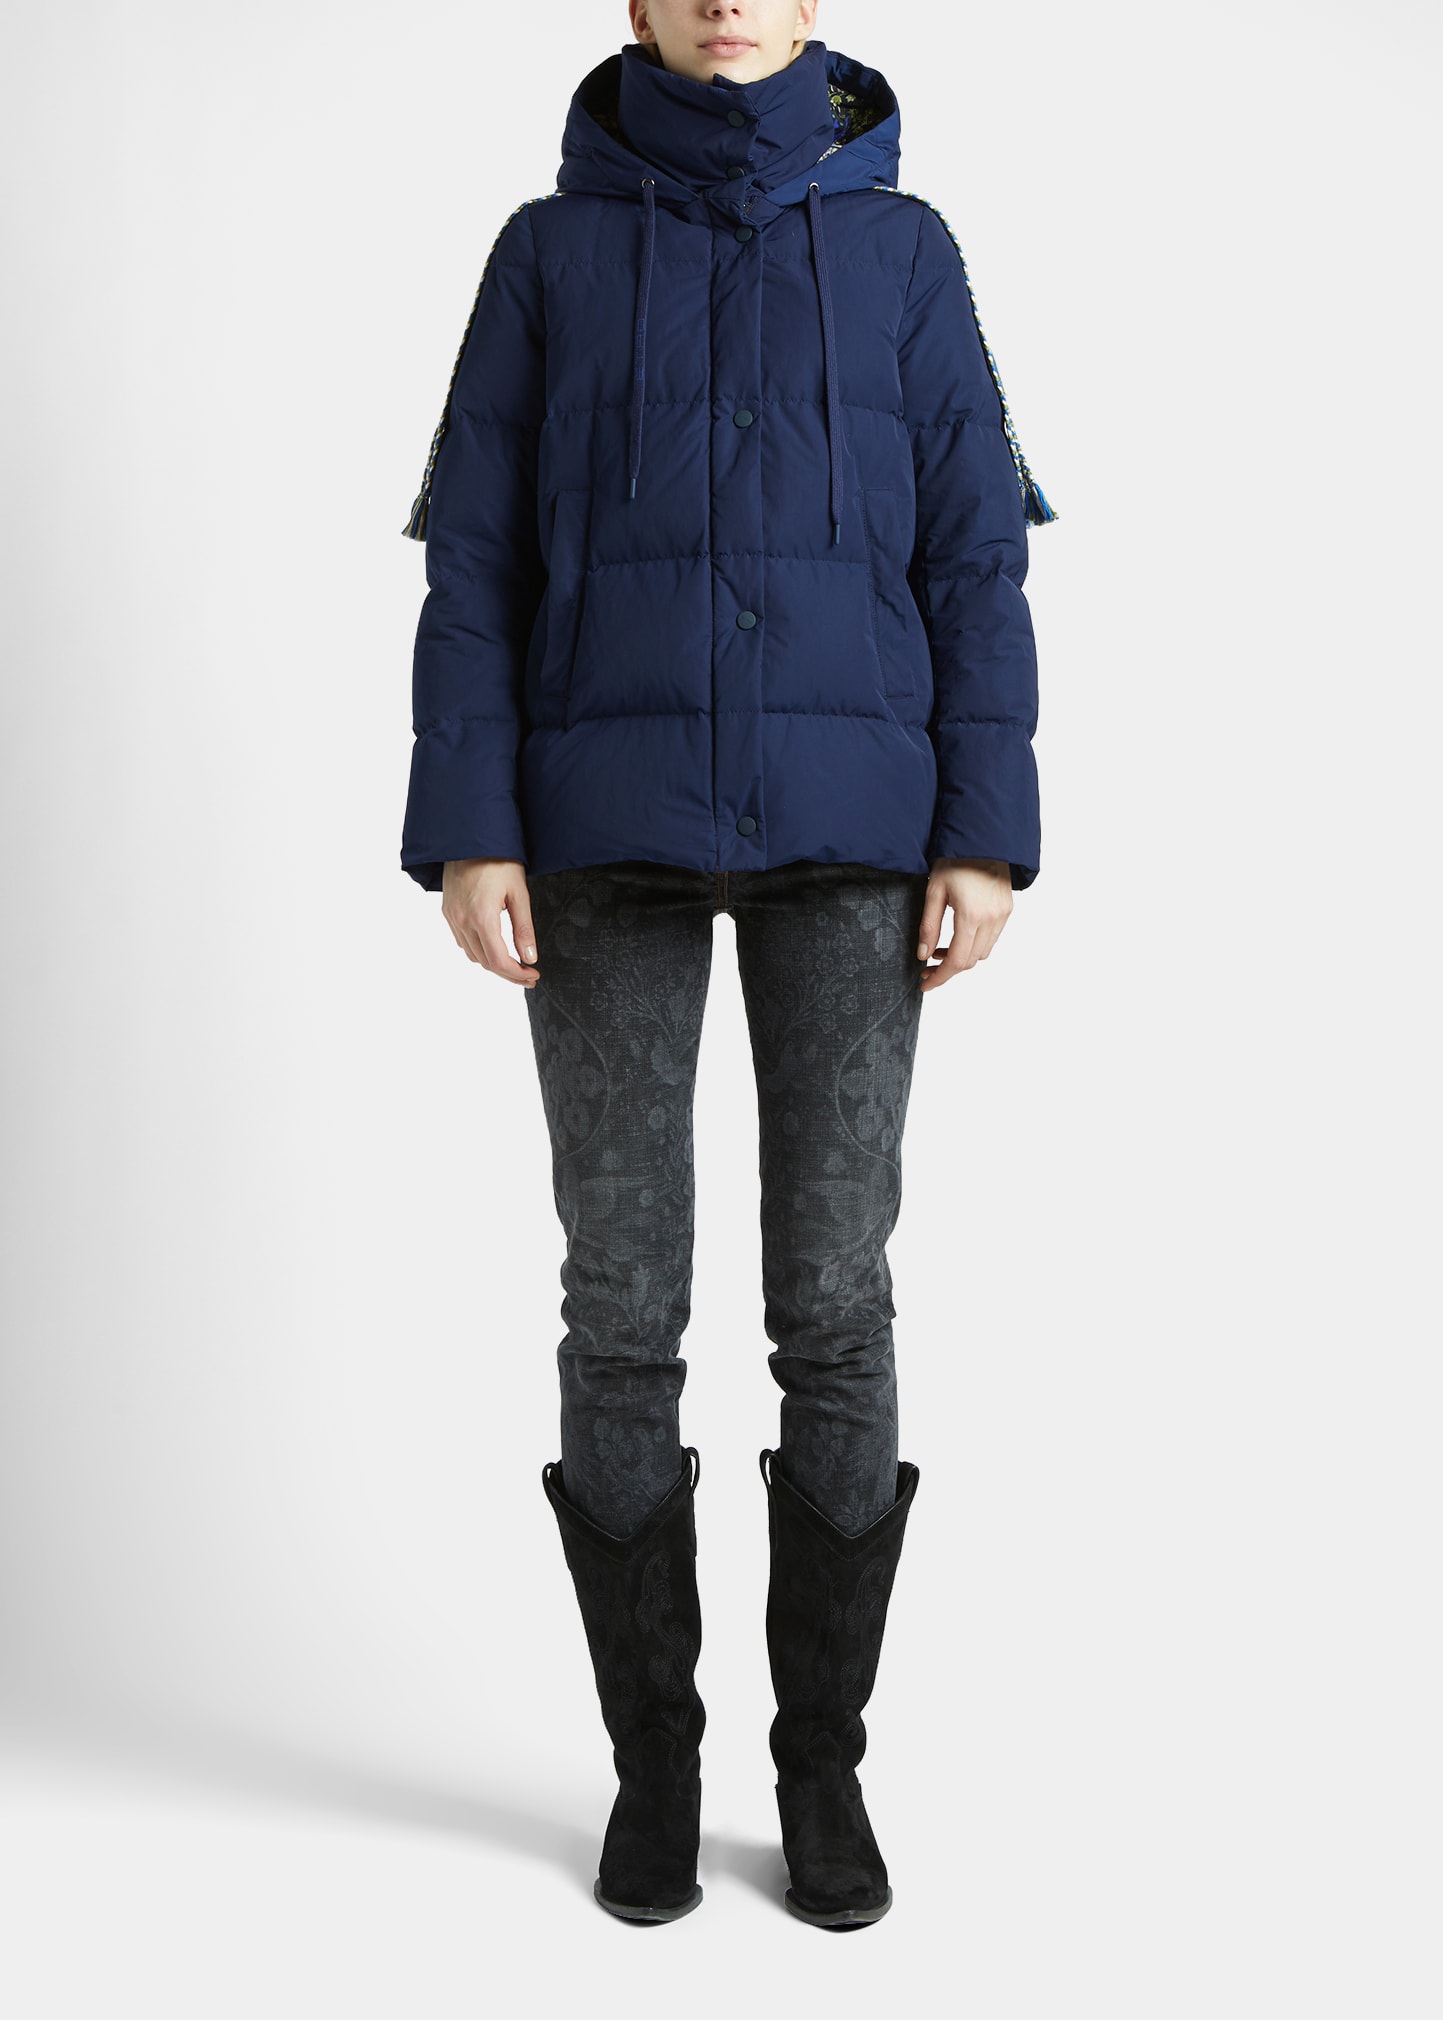 Beatrice Hooded Puffer Jacket